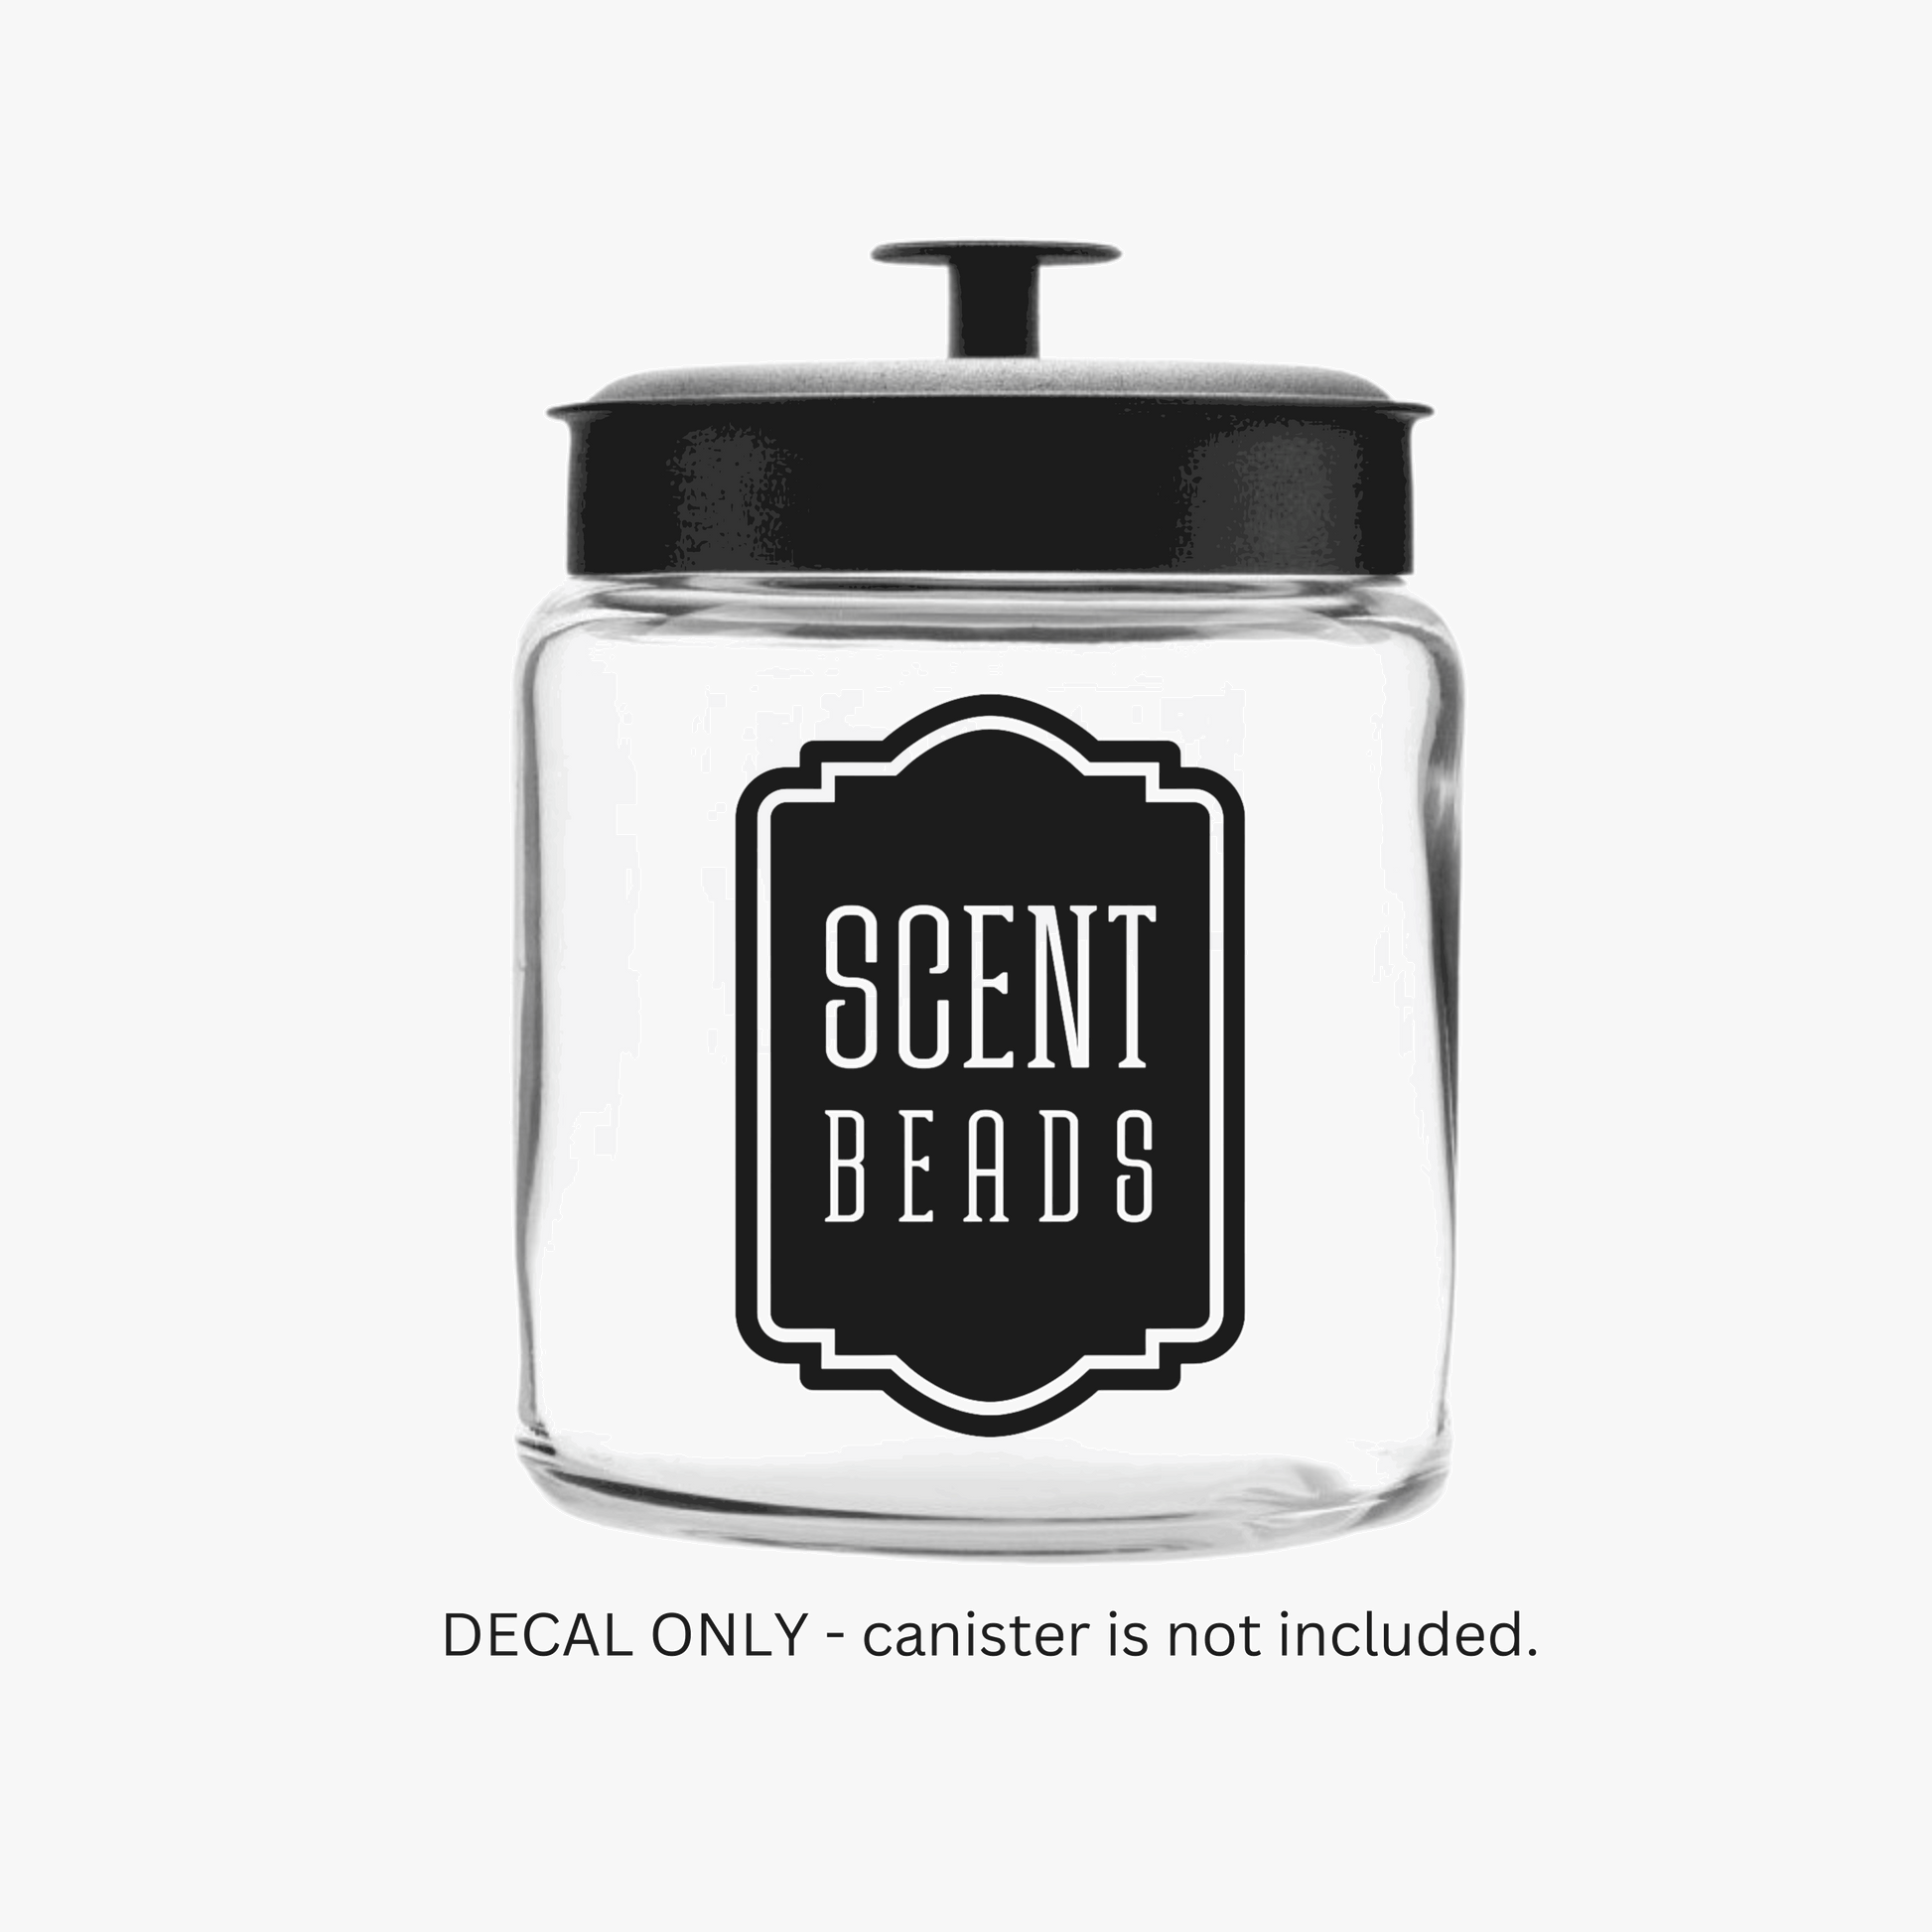 Scent Beads Decal